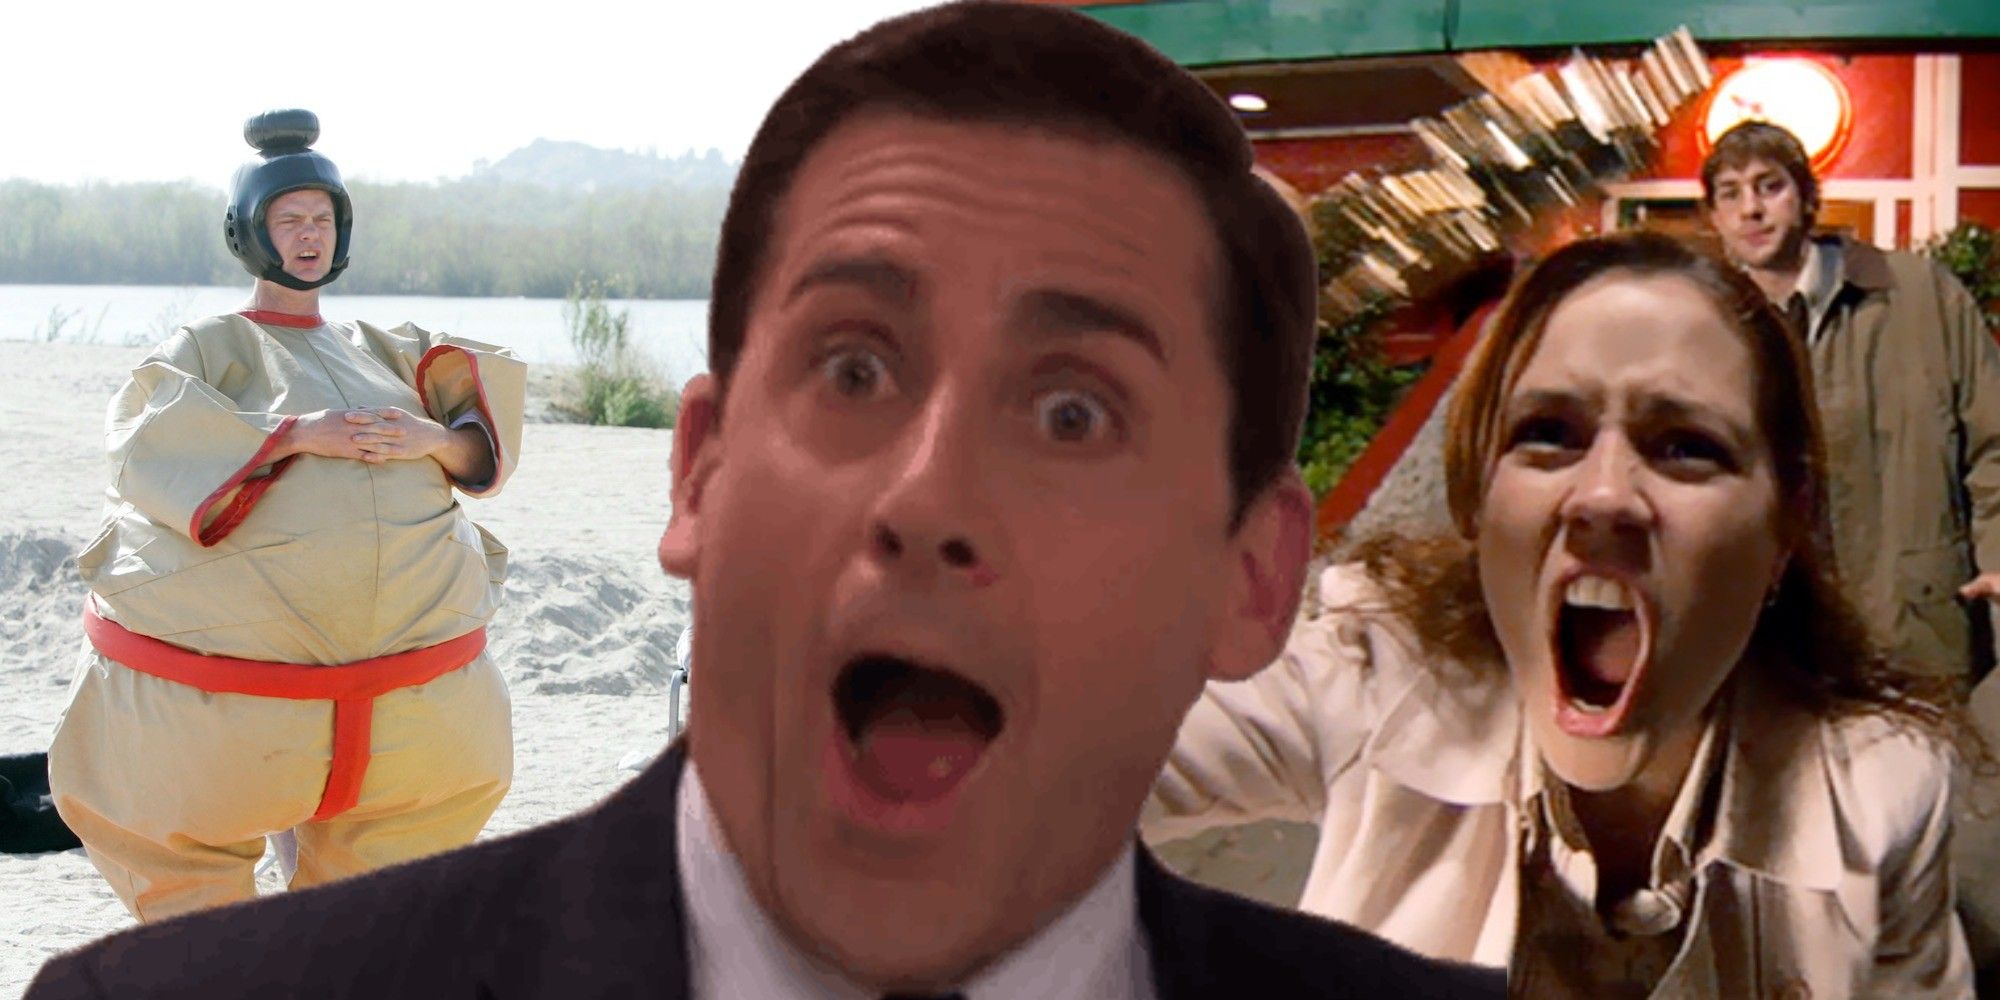 The 20 Funniest Episodes Of The Office